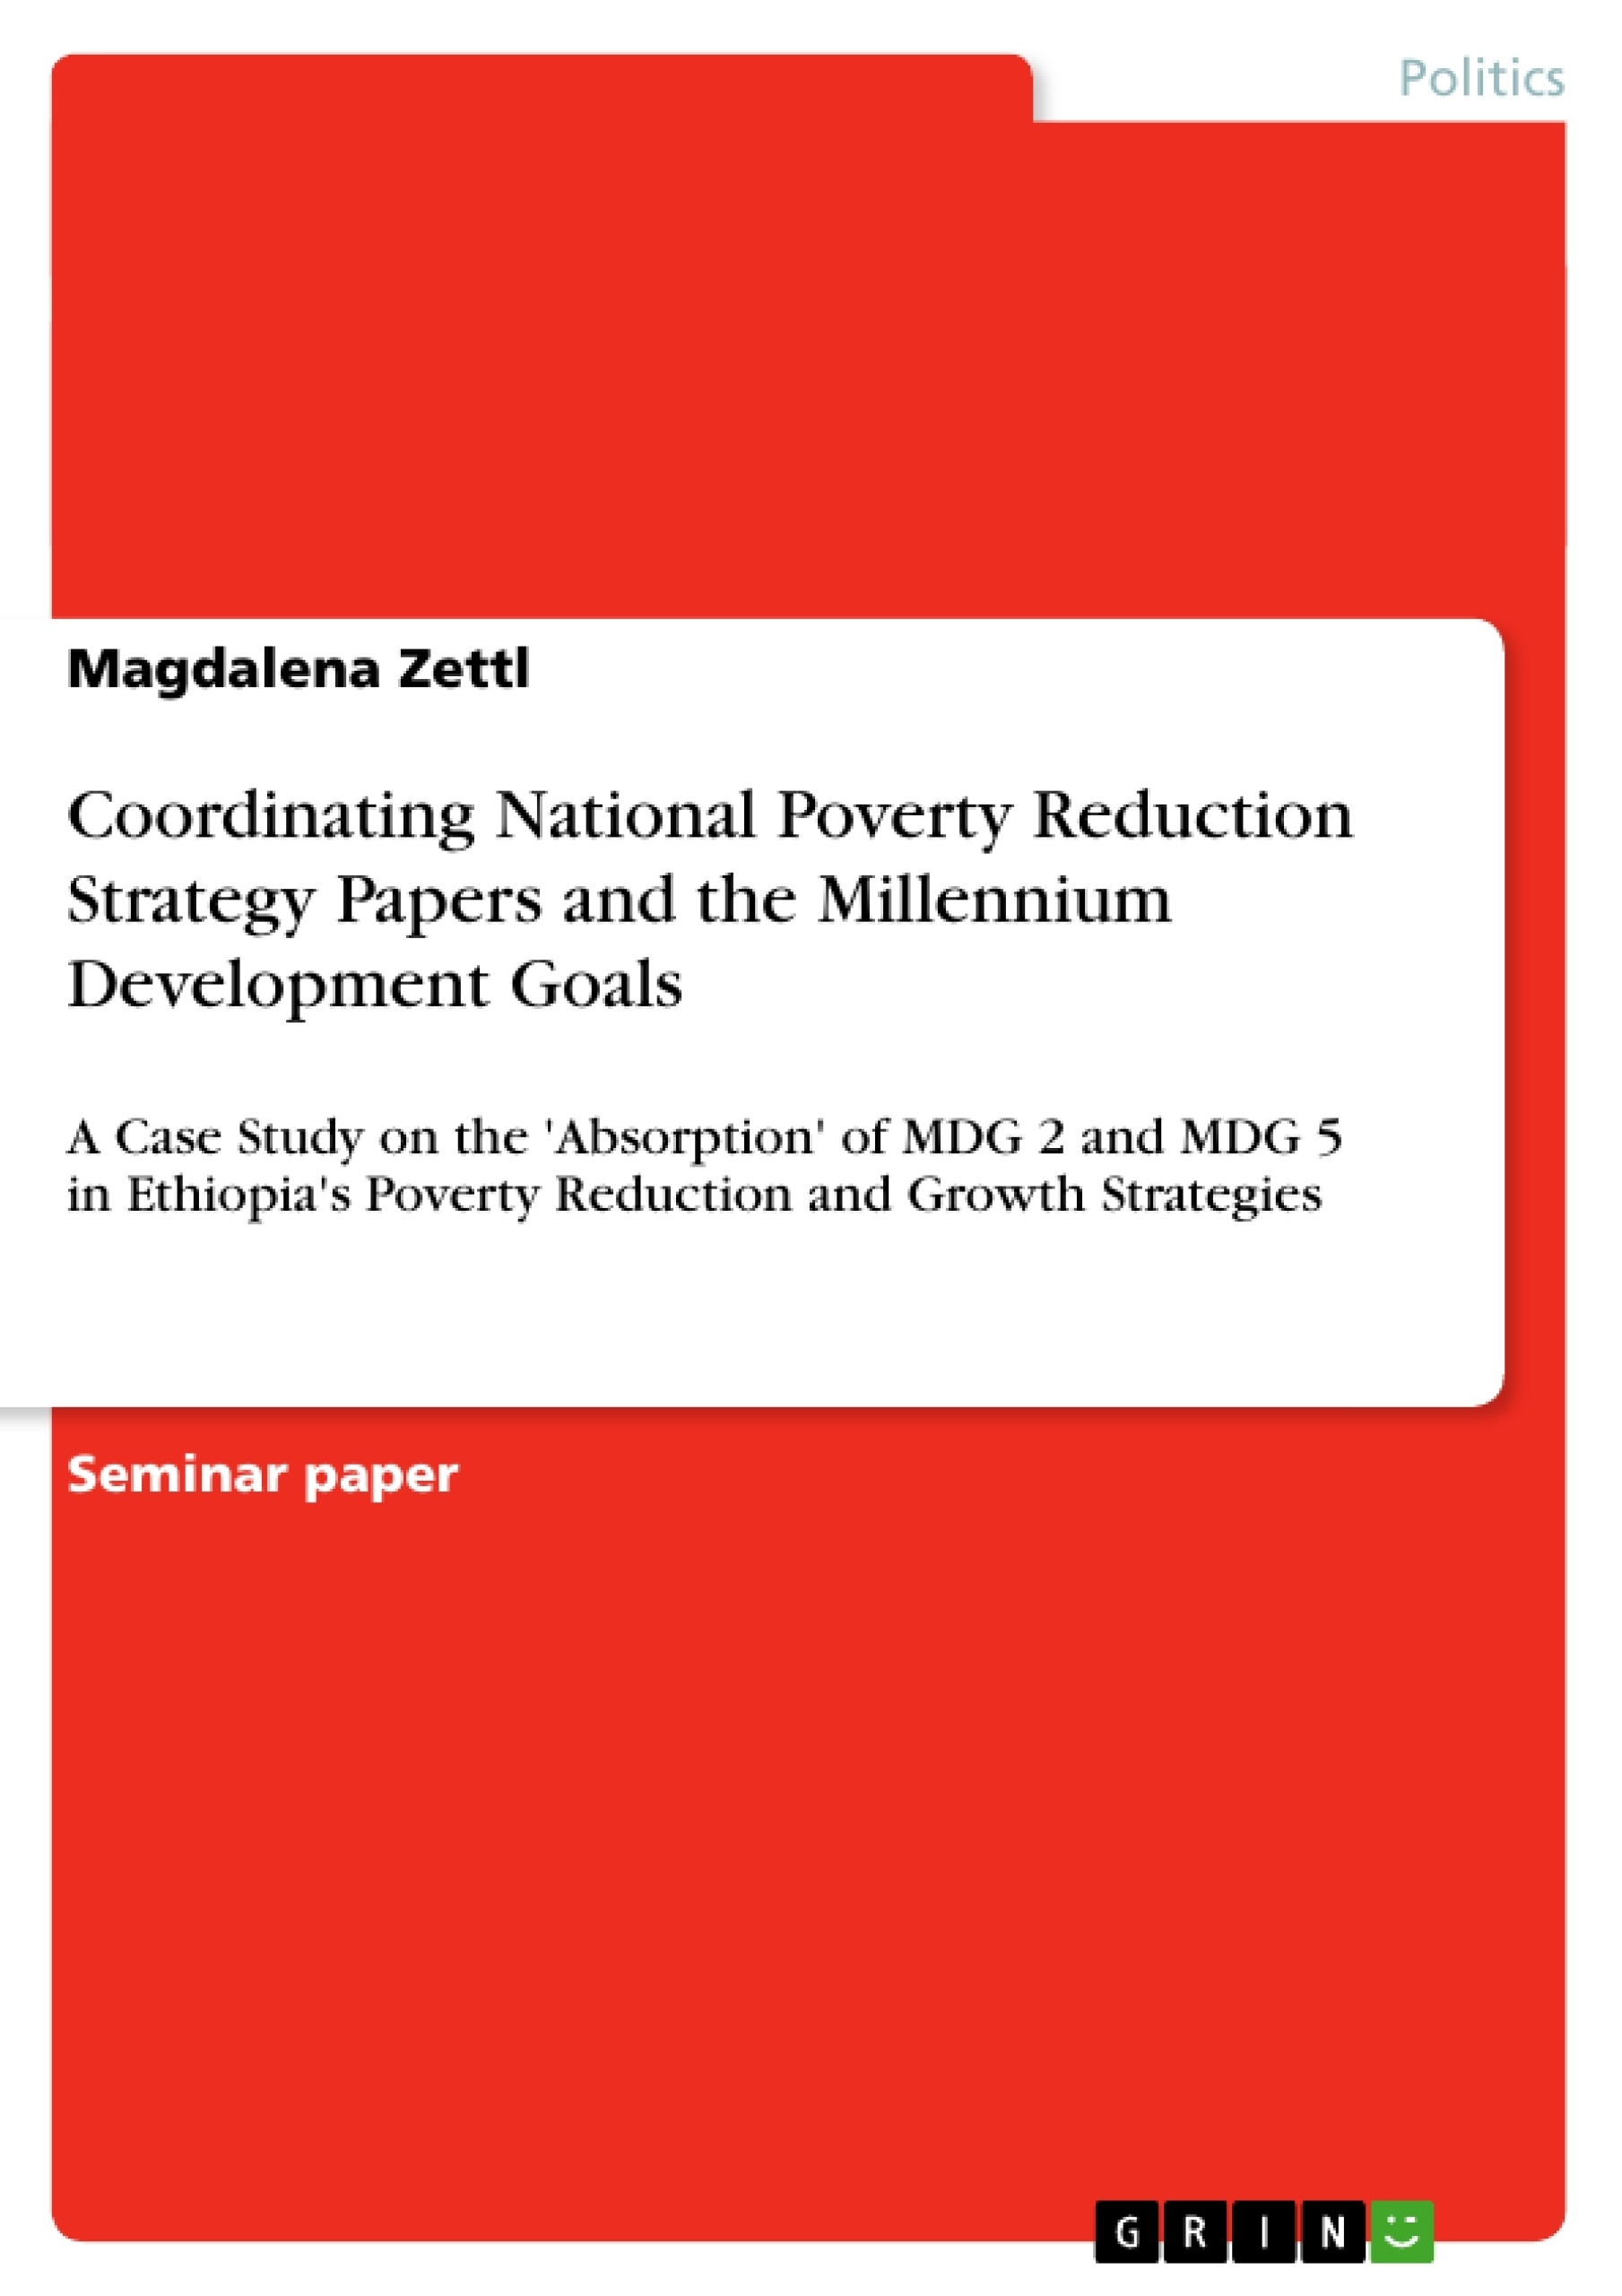 Title: Coordinating National Poverty Reduction Strategy Papers and the Millennium Development Goals